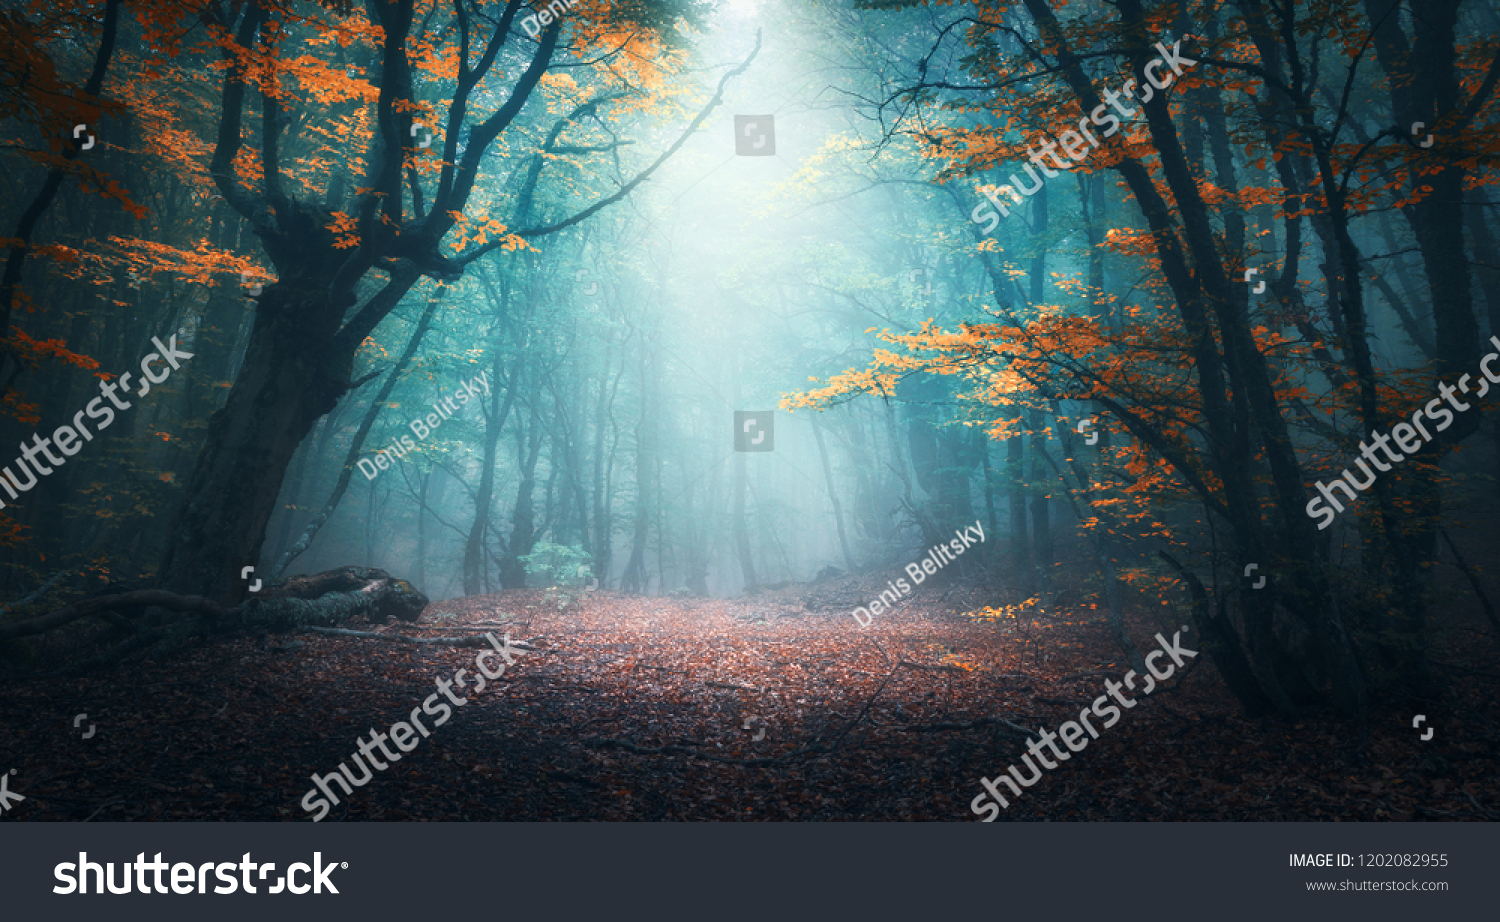 Beautiful mystical forest in blue fog in autumn. Colorful landscape with enchanted trees with orange and red leaves. Scenery with path in dreamy foggy forest. Fall colors in october. Nature background #1202082955